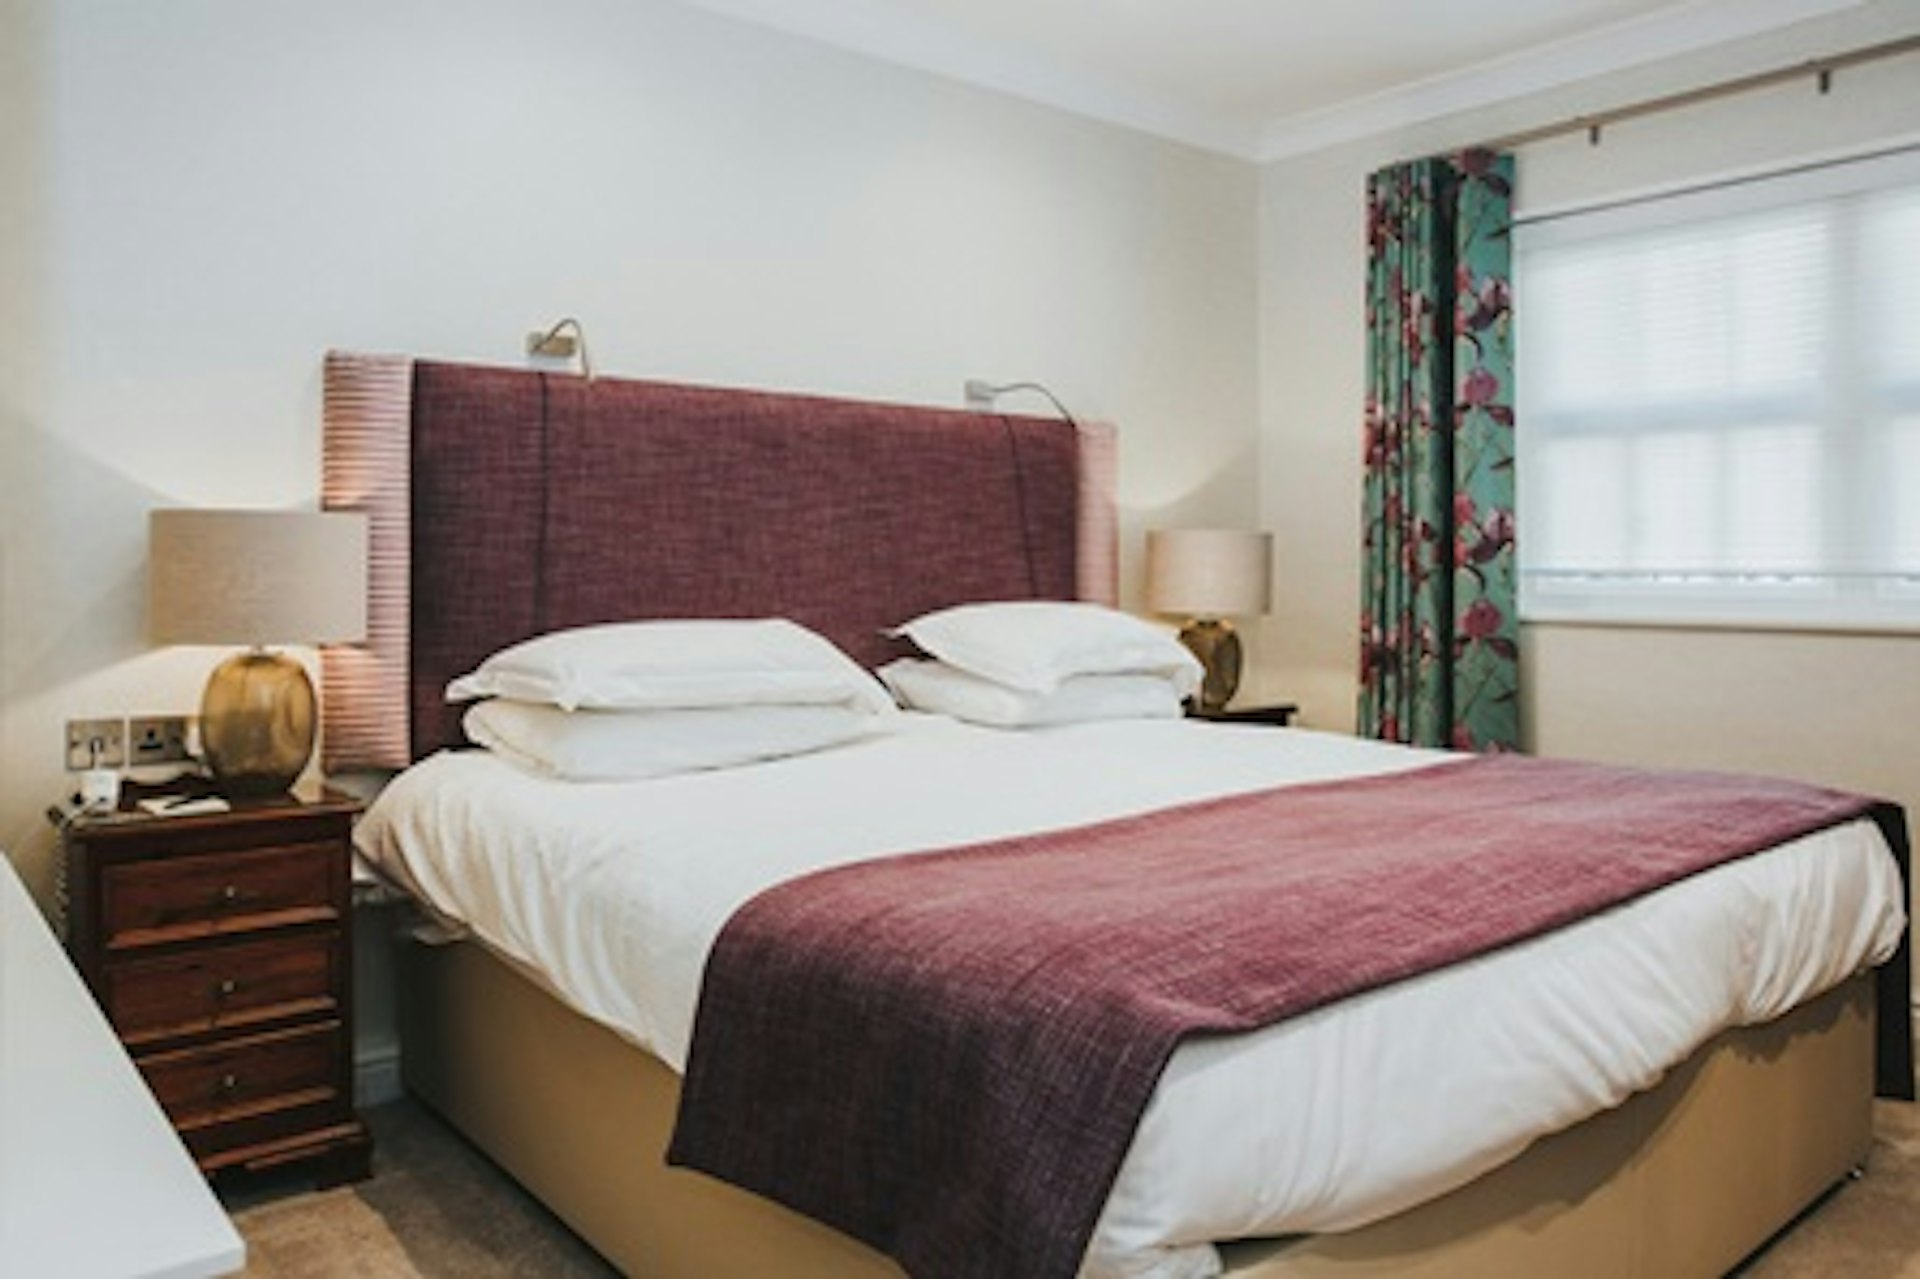 One Night Lake District Break for Two at Briery Wood Country House Hotel, Windermere 2